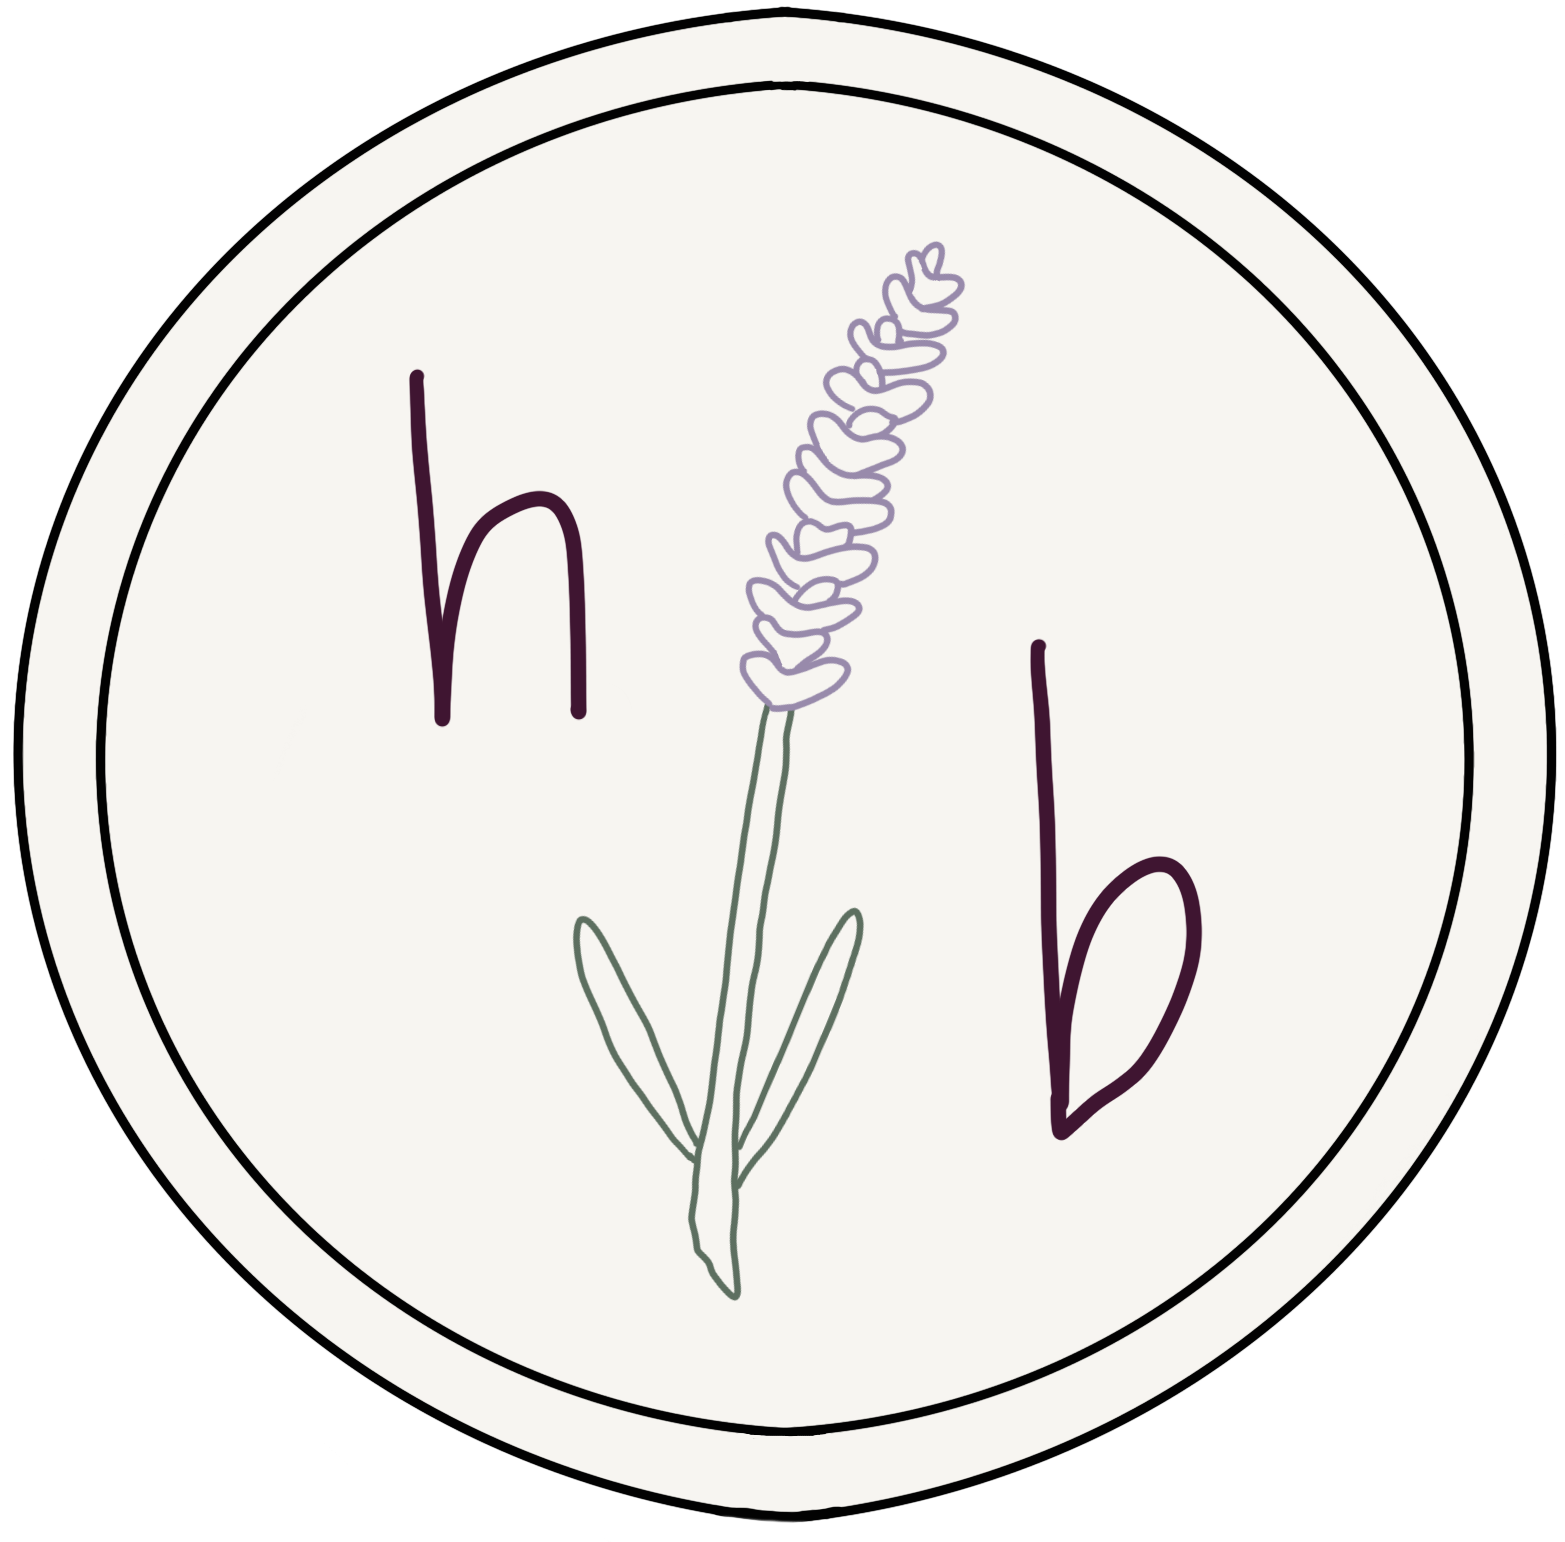 Circle with hand drawn lavender sprig inside, with the letters H and B